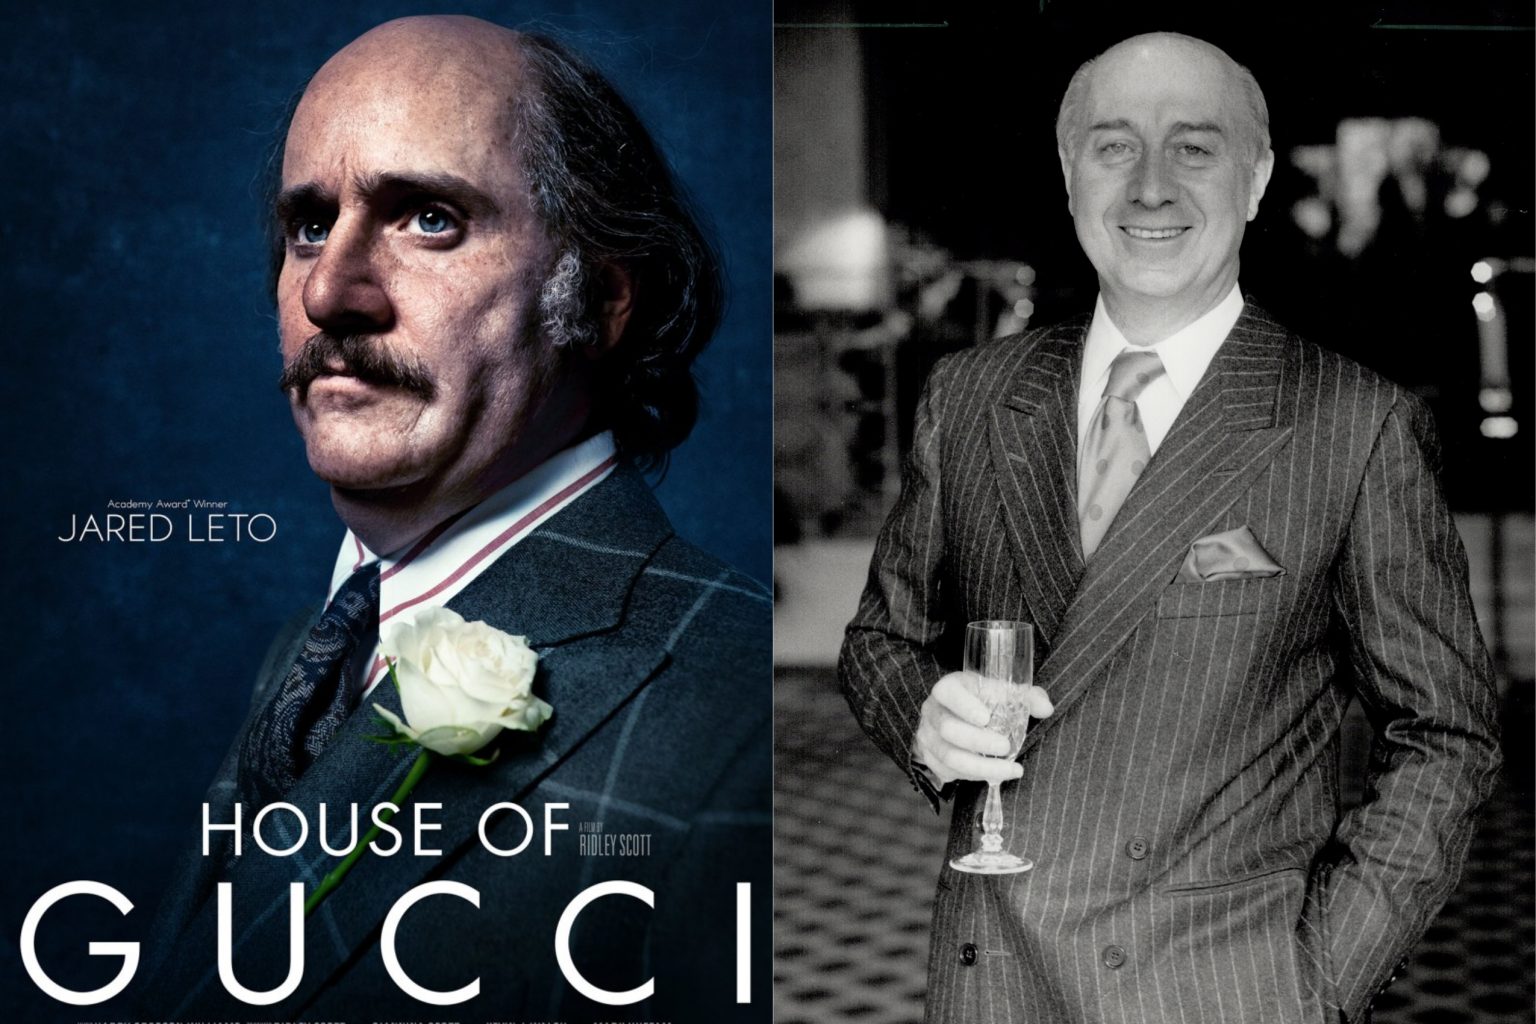 A tale of love, control, and murder: Meet the real House of Gucci